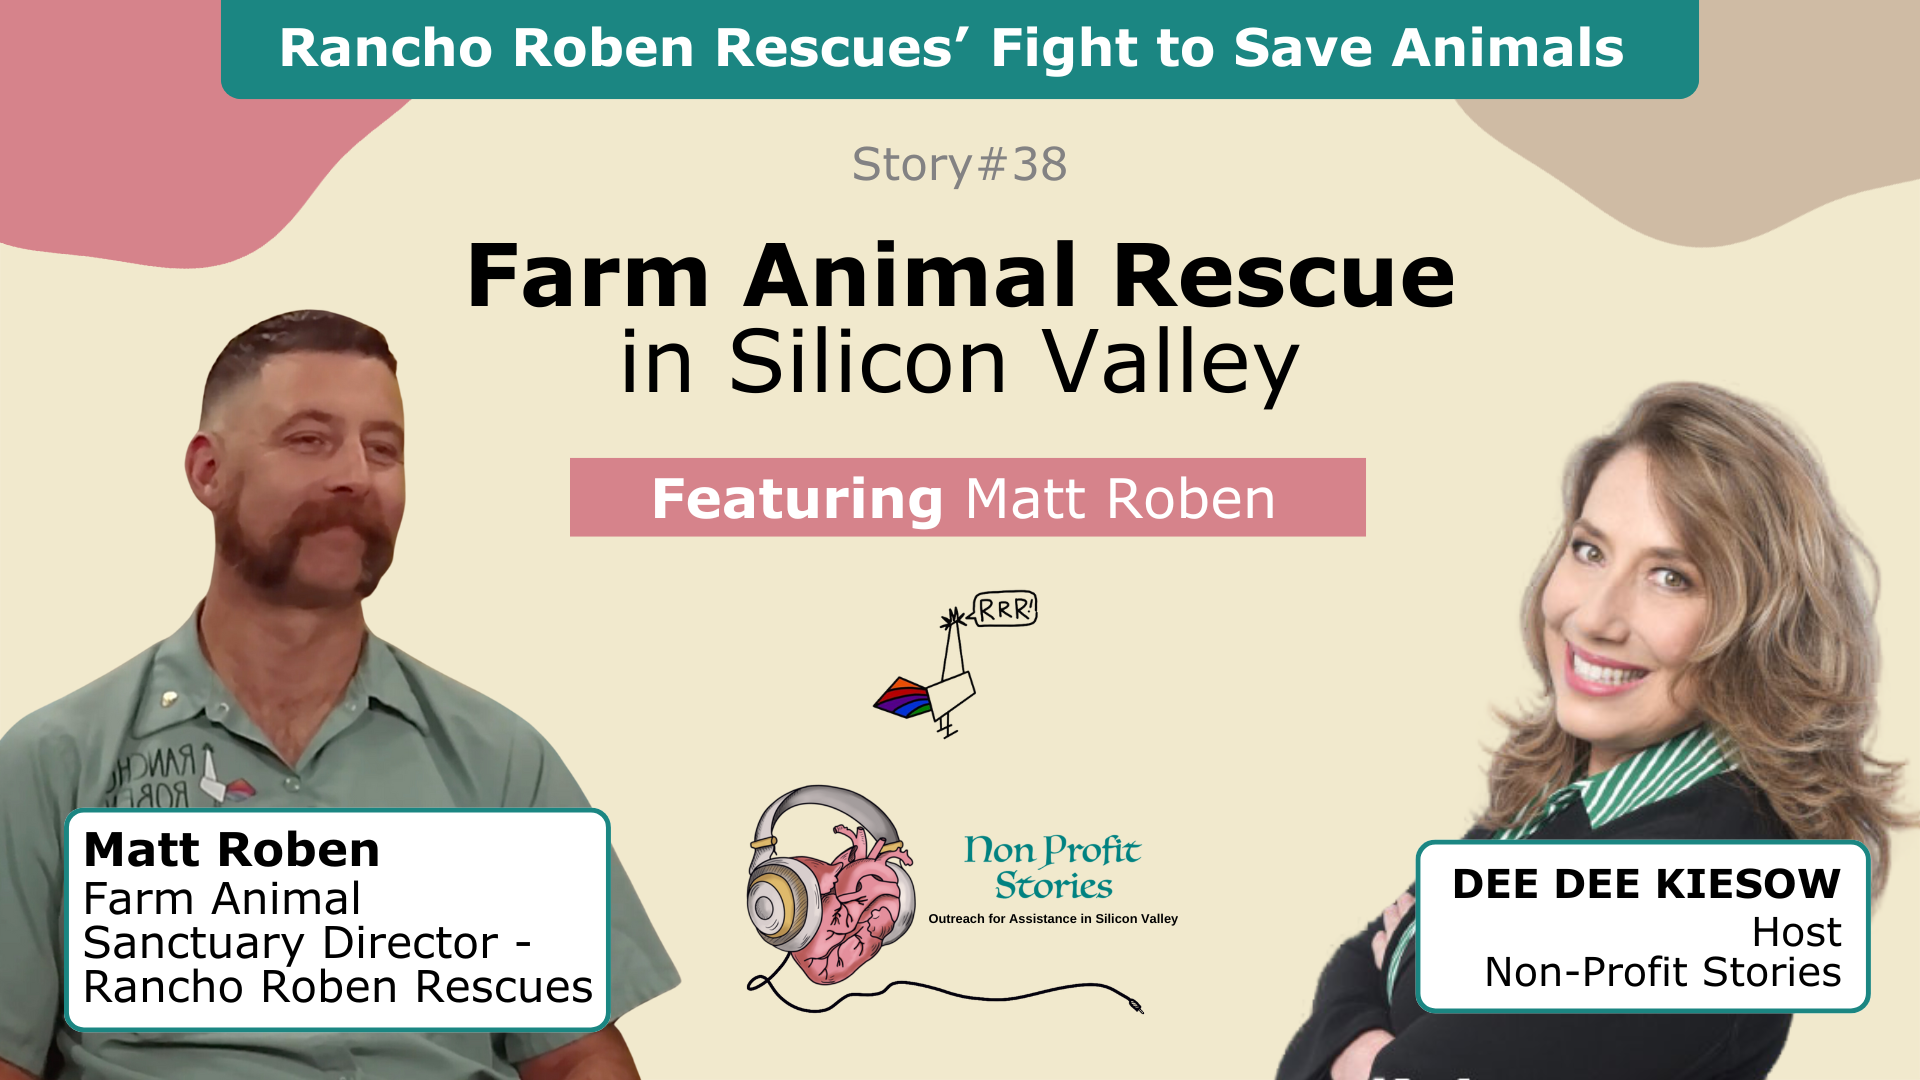 Farm Animal Rescue: Rancho Roben Rescues’ Fight to Save Animals in Silicon Valley Video